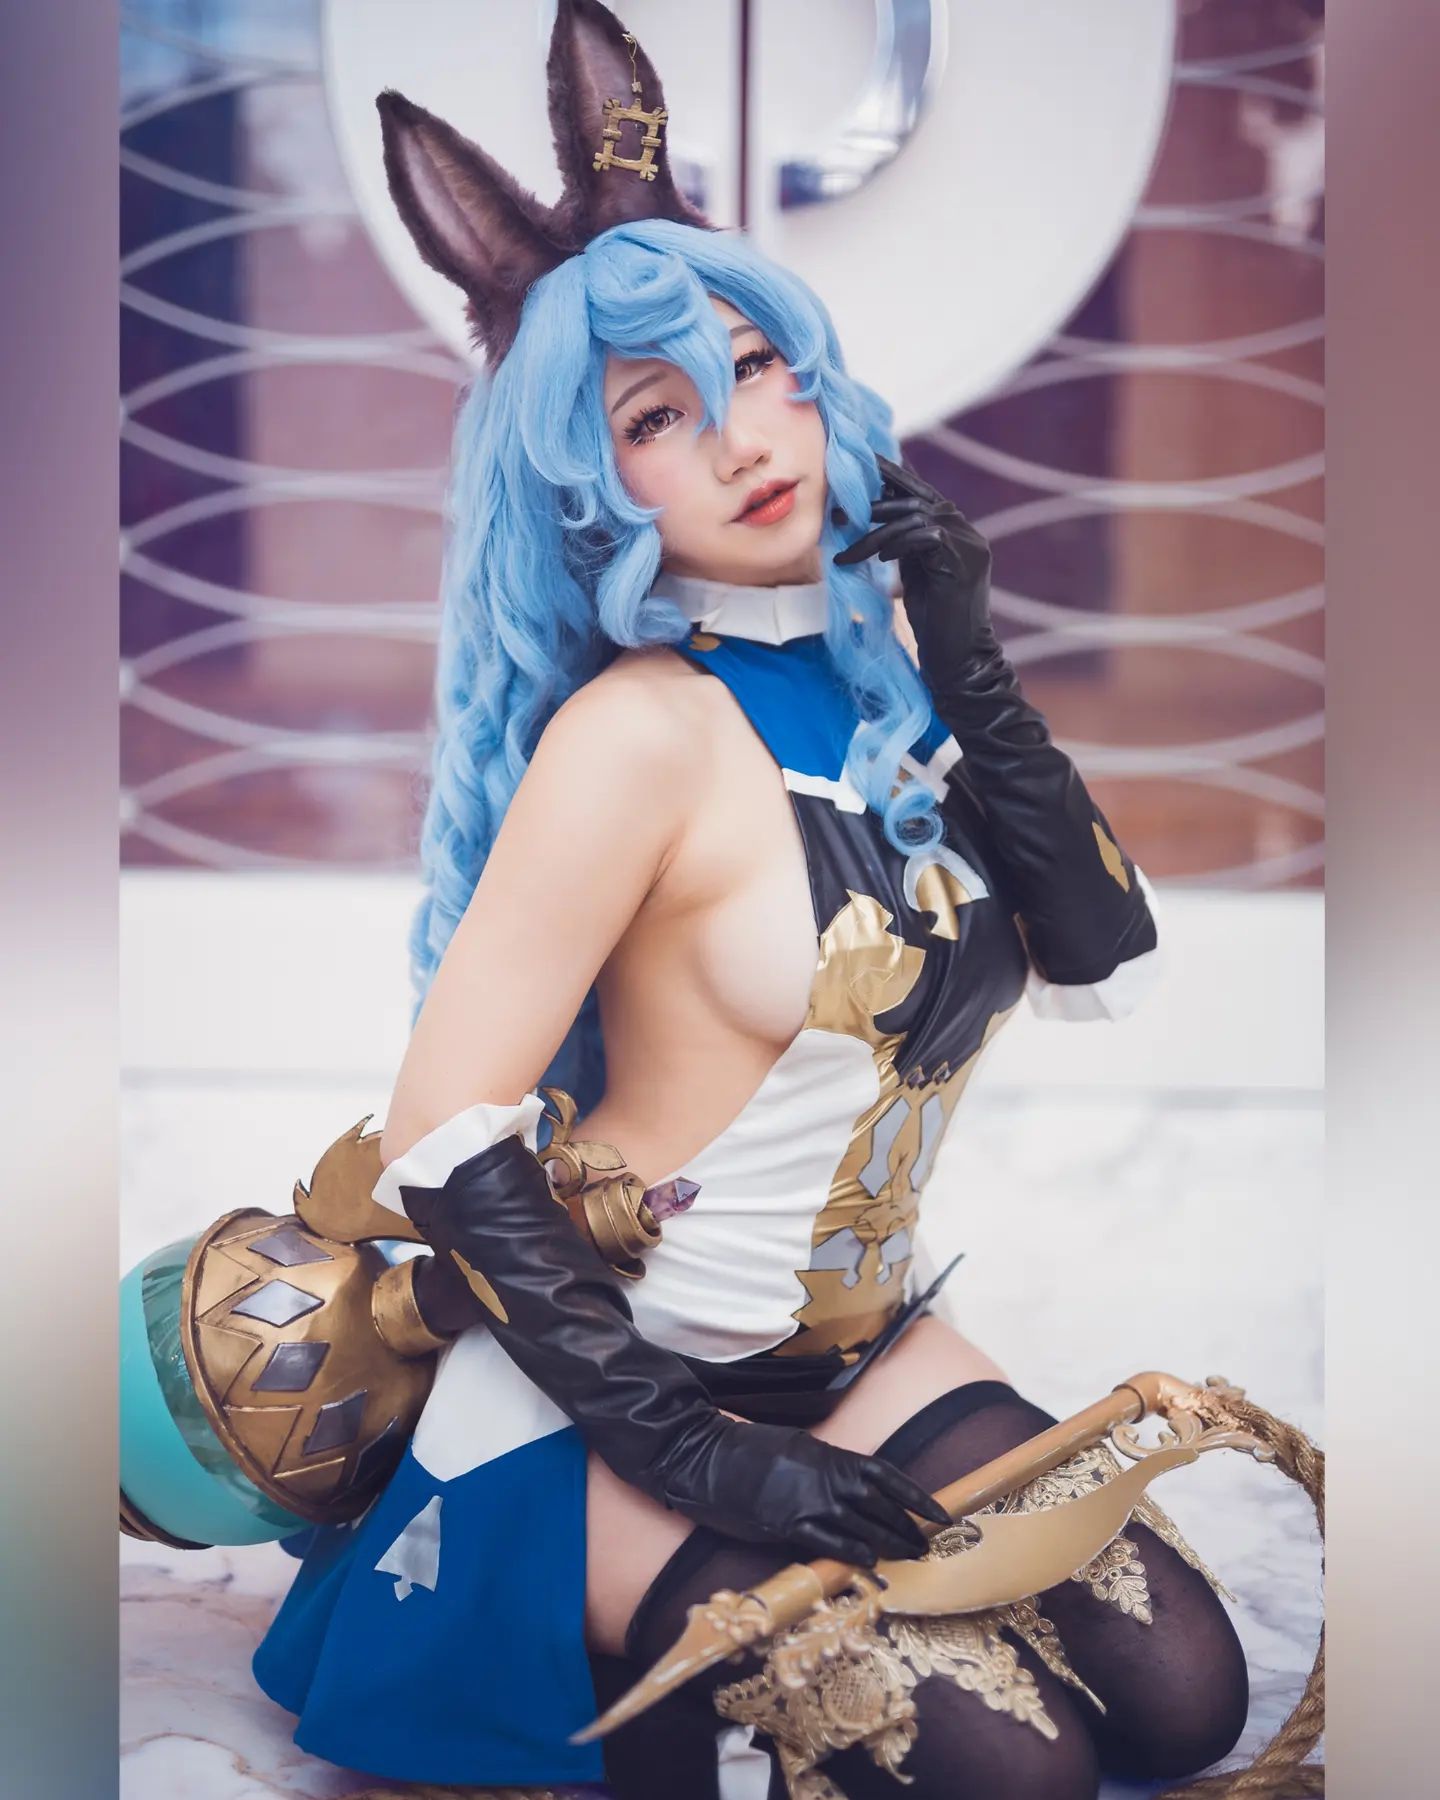 「My name is... right, it's Ferry. It's a pleasure to meet you.」
@danisaurz 💙

#granbluefantasy #granbluefantasycosplay #ferrycosplay